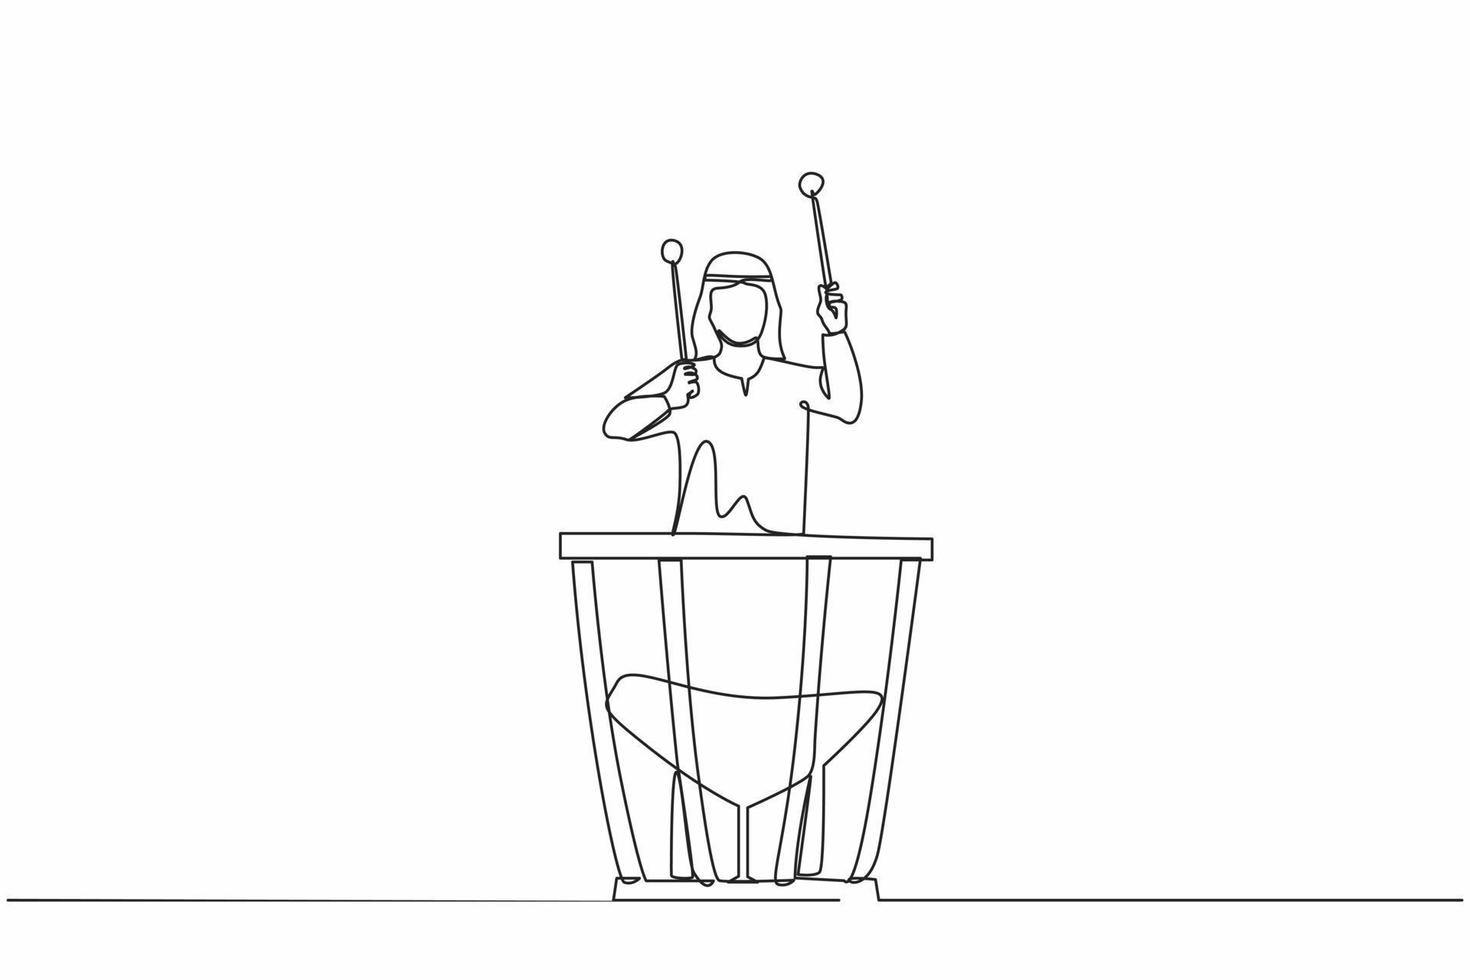 Continuous one line drawing Arab male percussion player play on timpani. Man performer holding stick and playing musical instrument. Musical instrument timpani. Single line draw design vector graphic